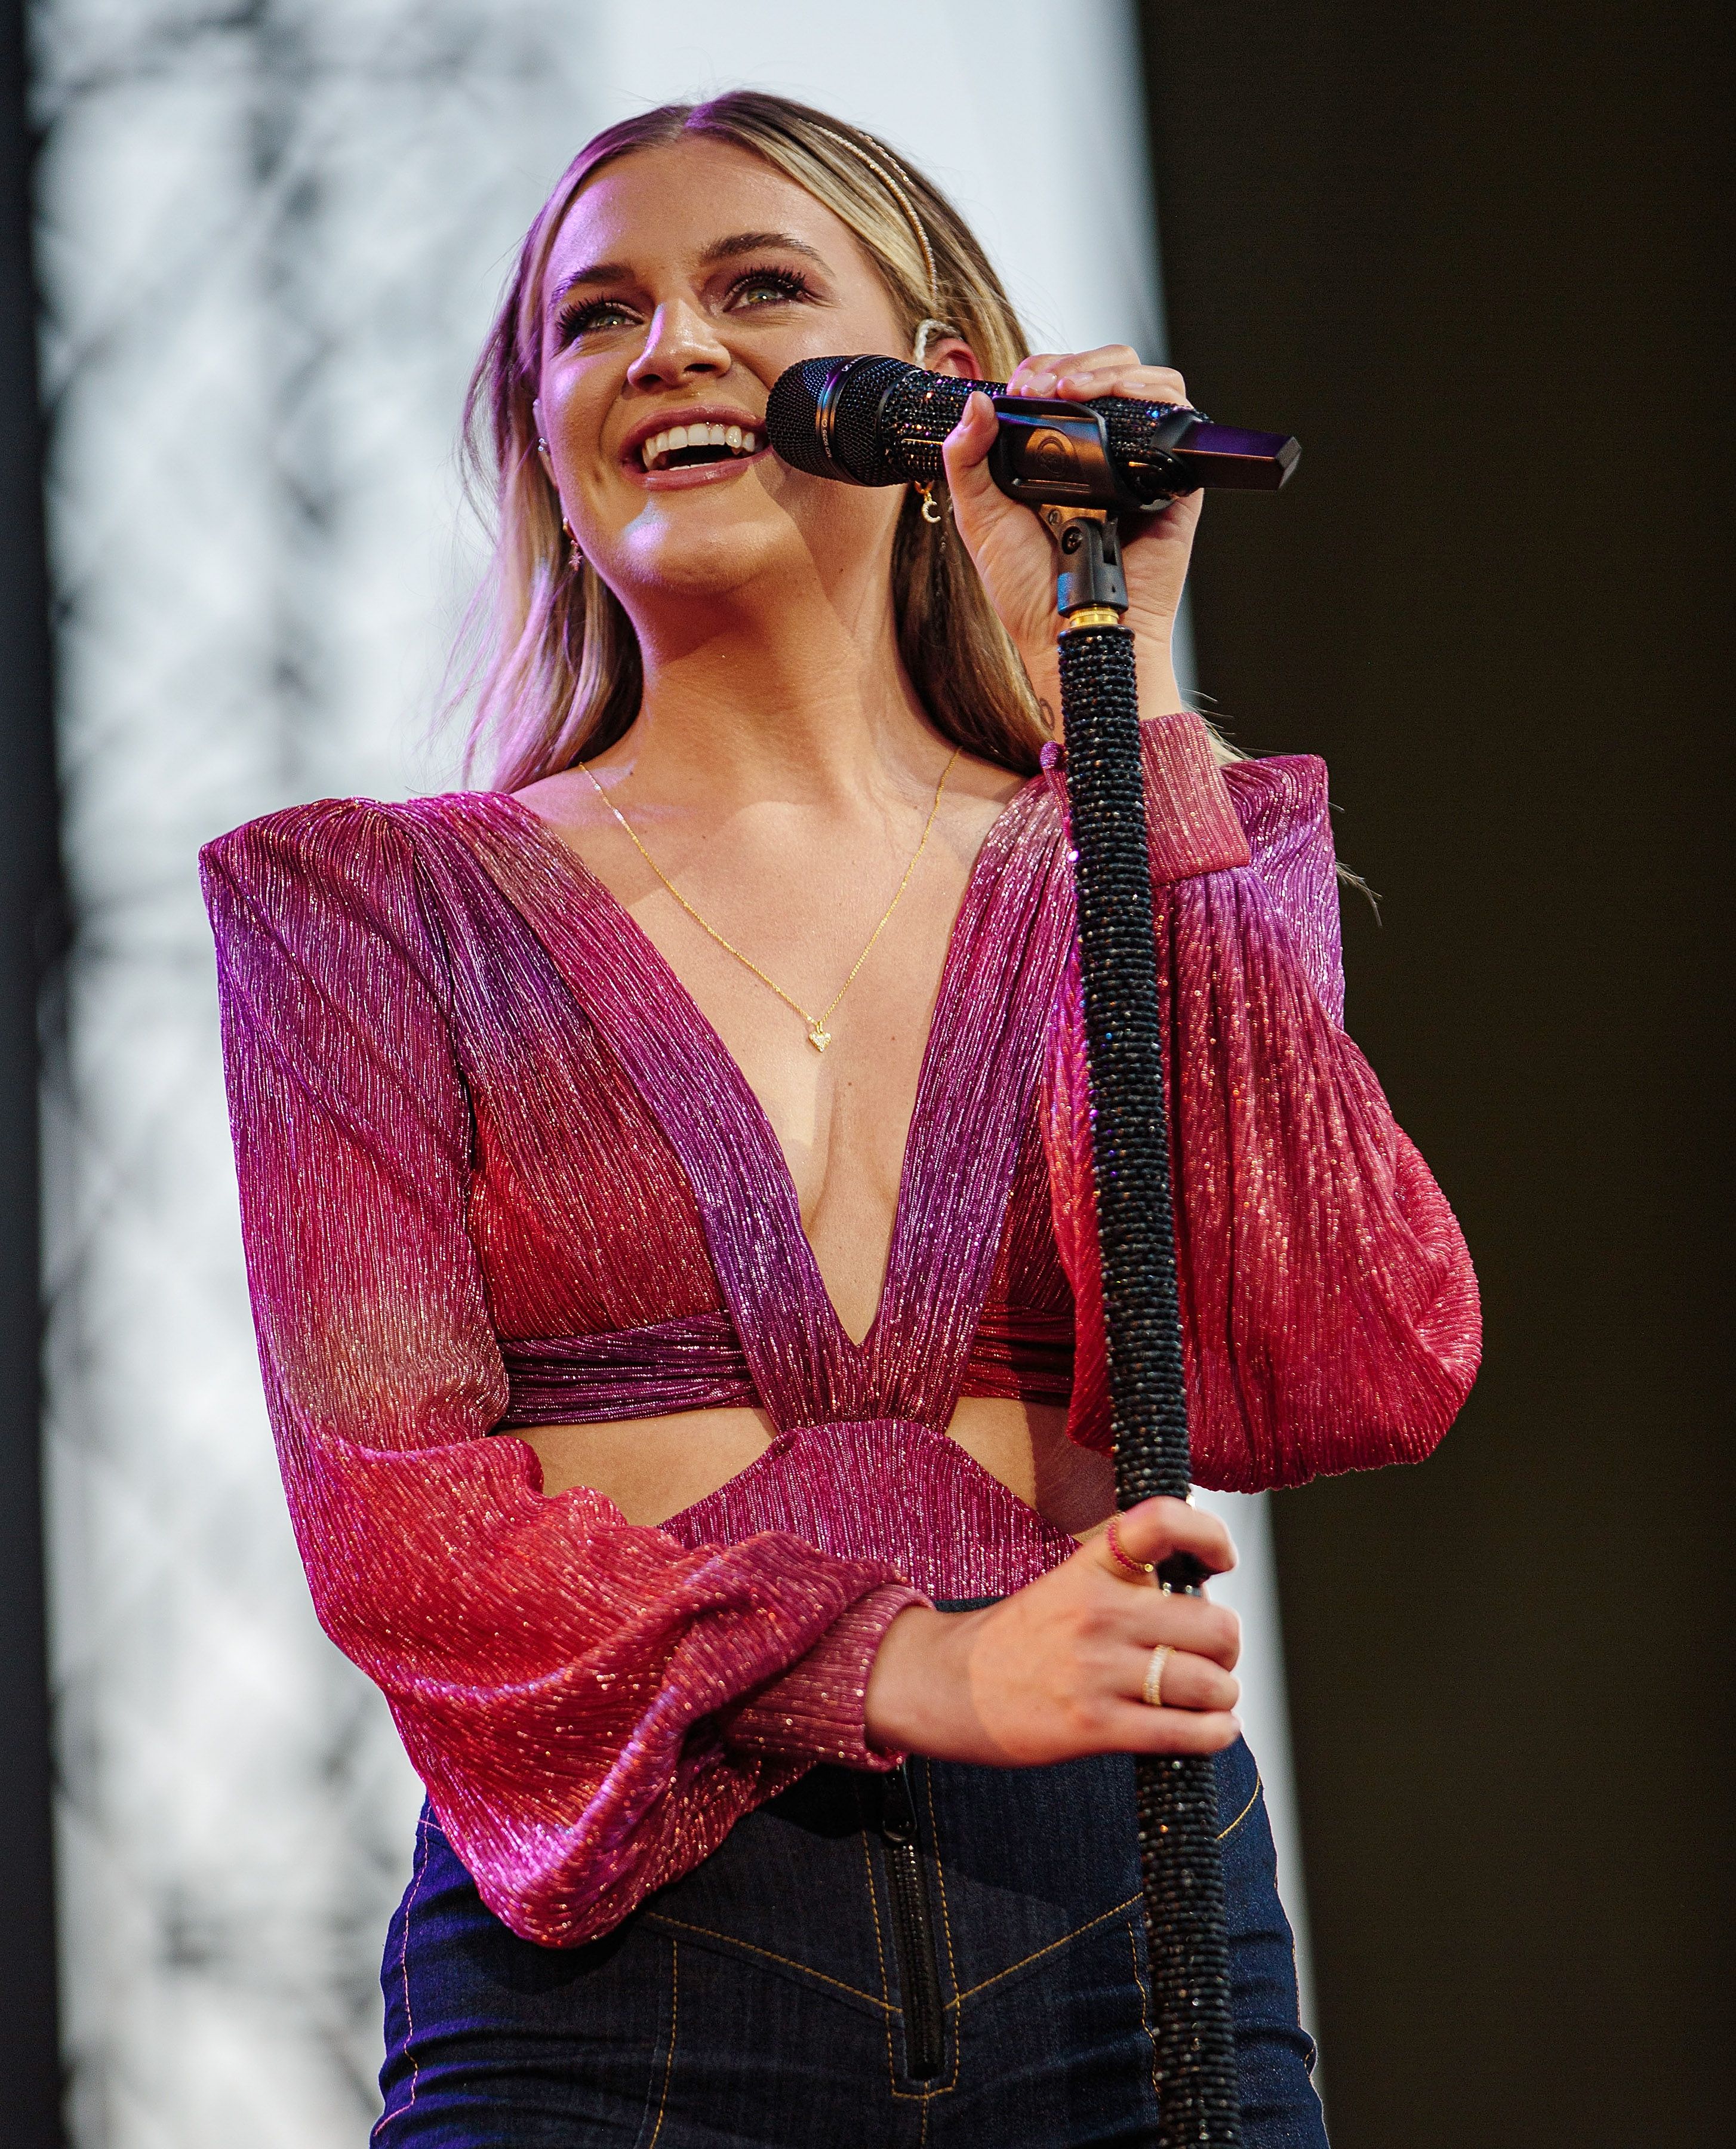 Kelsea Ballerini Braless Outfits Photos of Her Without a Bra Life